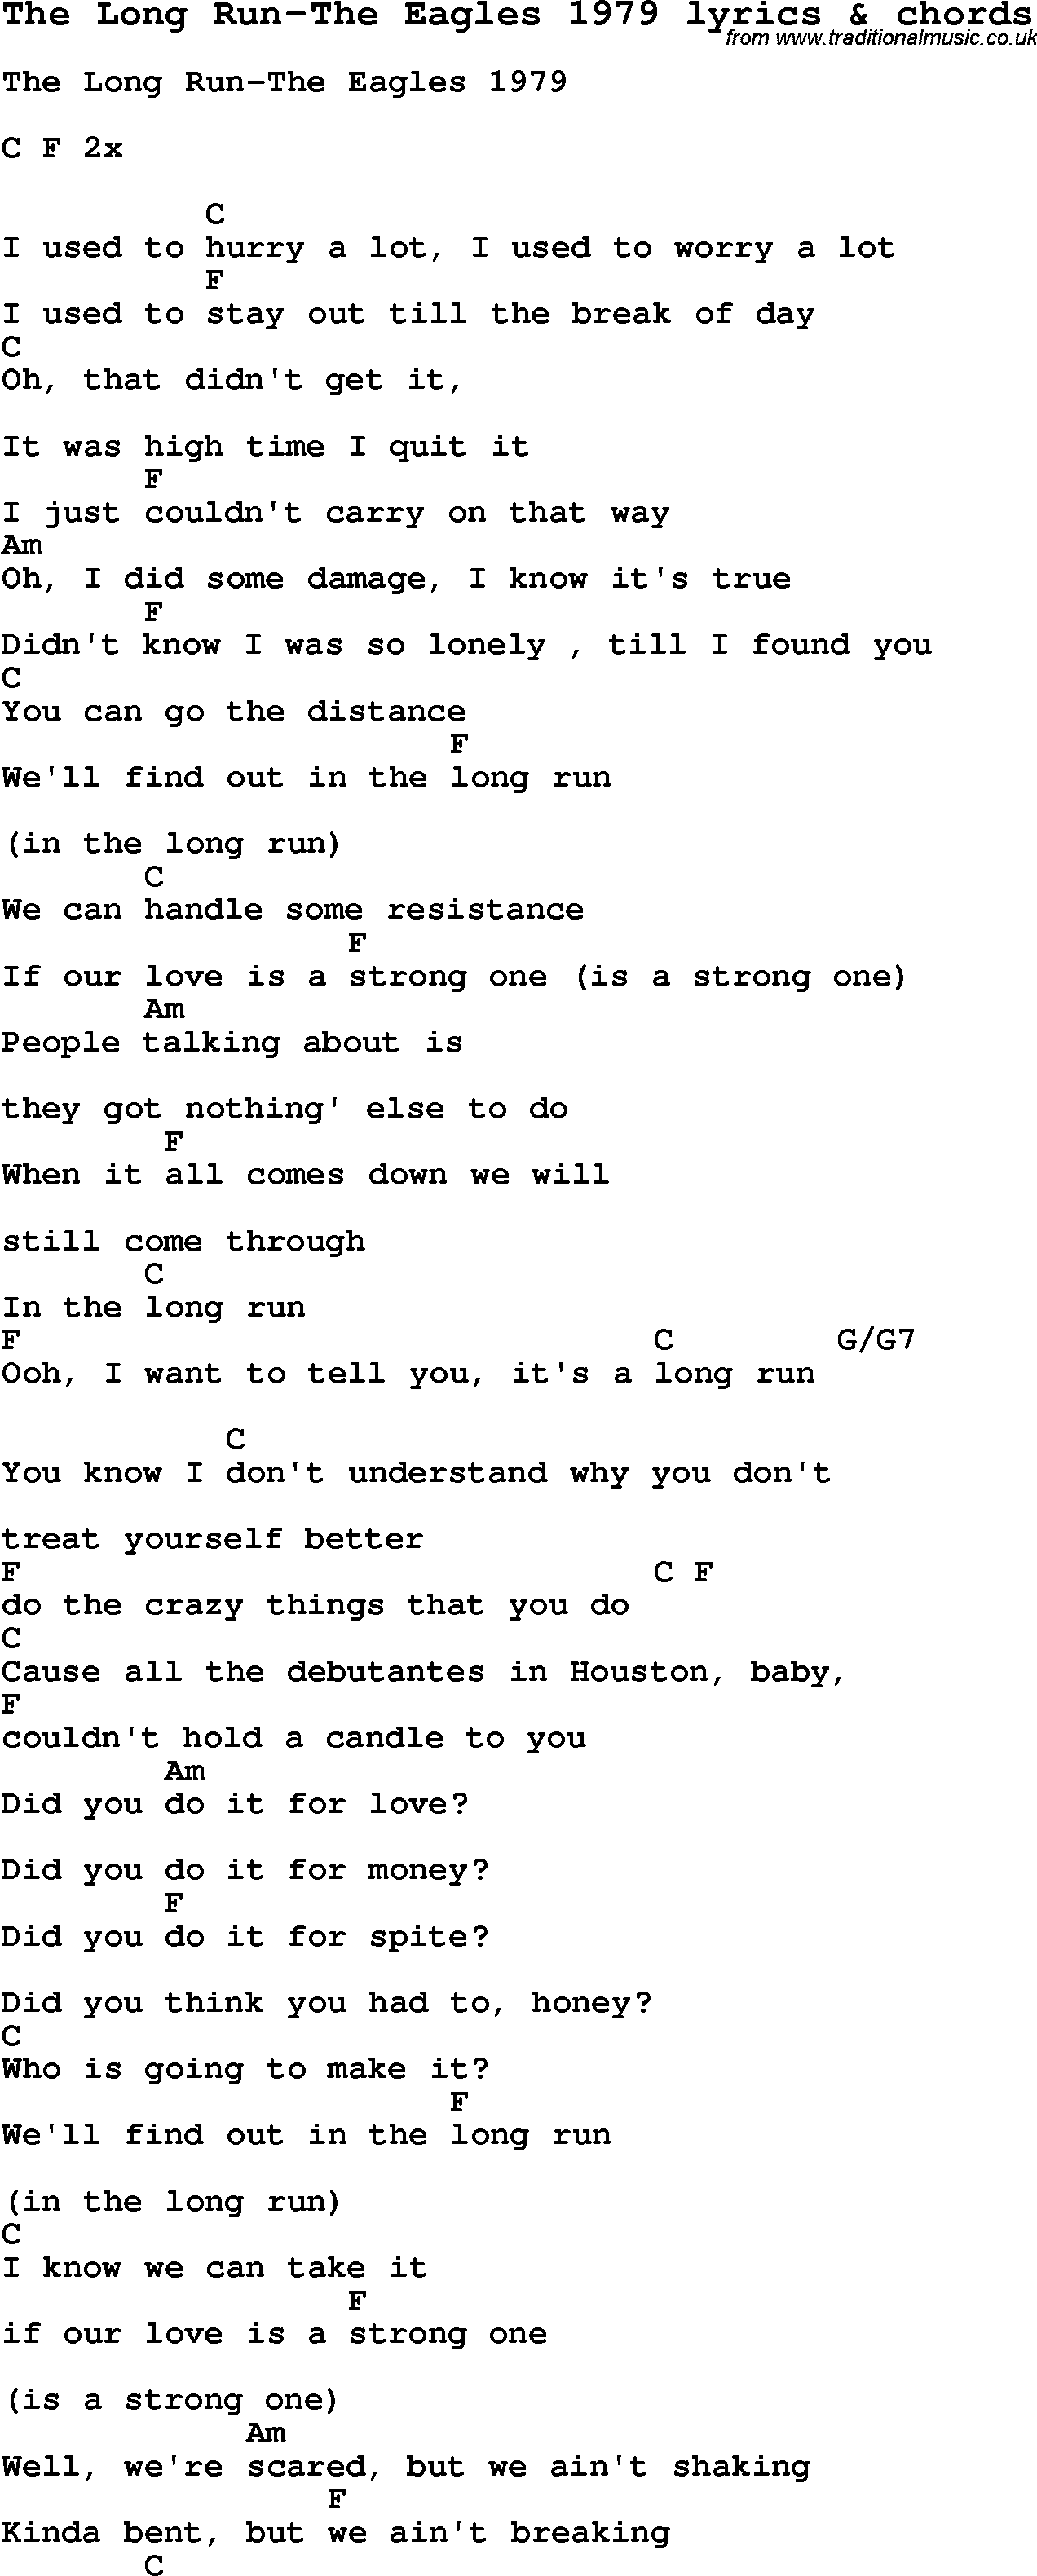 Love Song Lyrics for: The Long Run-The Eagles 1979 with chords for Ukulele, Guitar Banjo etc.